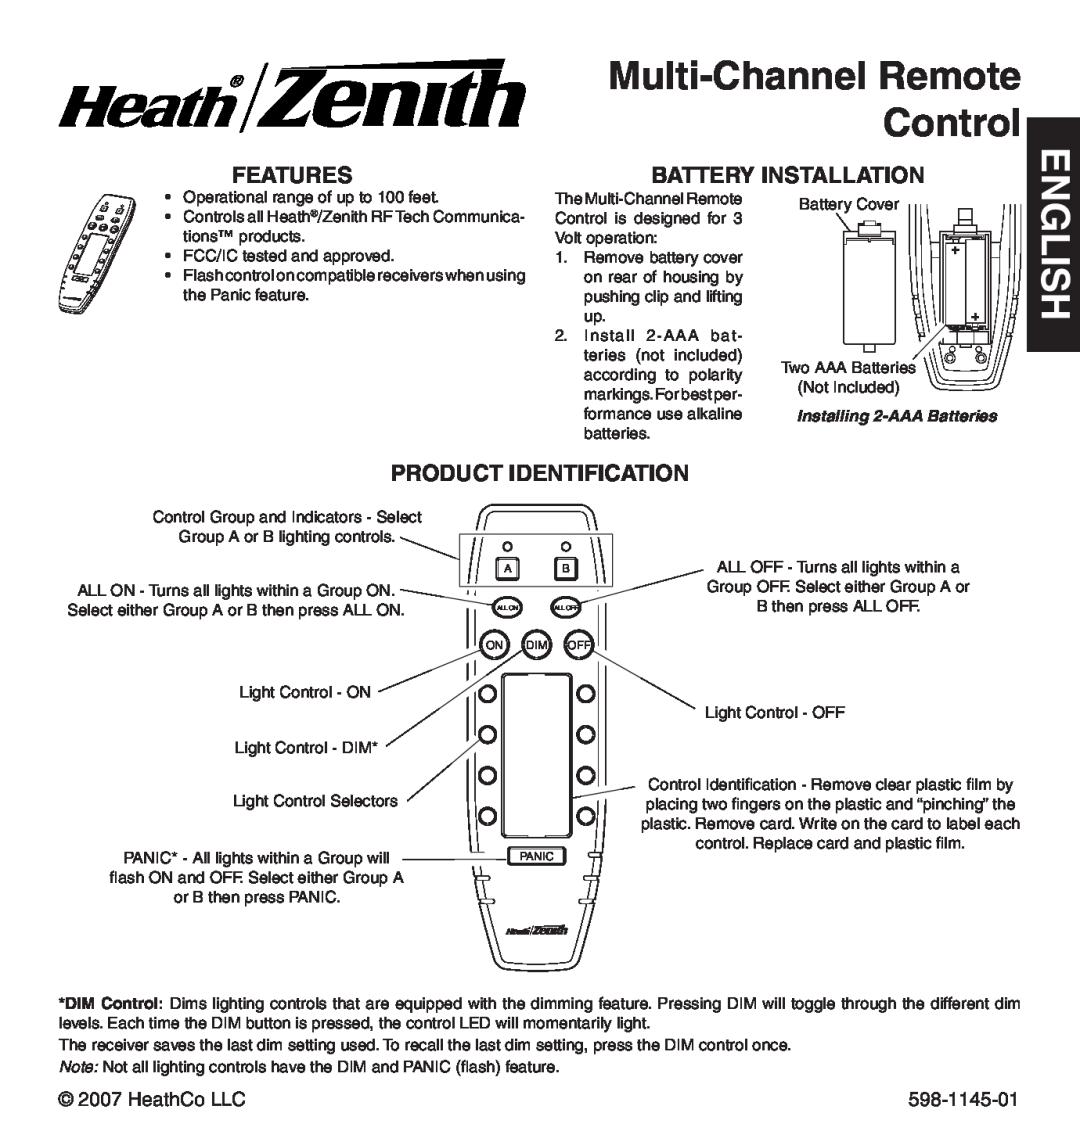 Heath Zenith Multi-Channel Remote Control manual Features, Battery Installation, Product Identification 